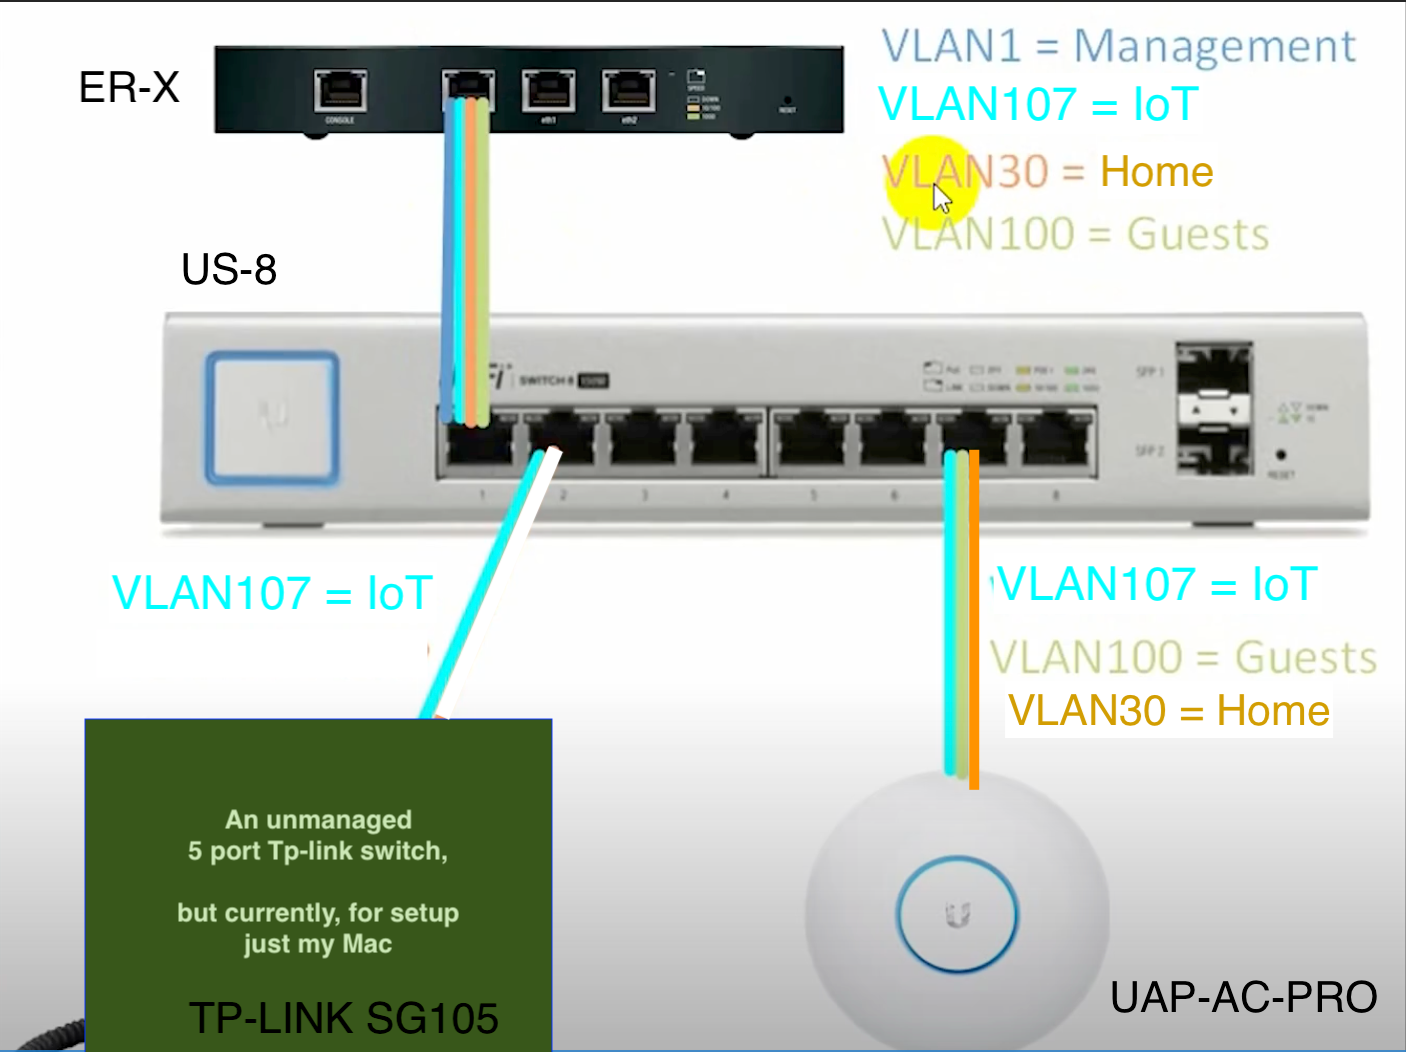 What is happening? - VLANs not working on UniFi Switch-8 via